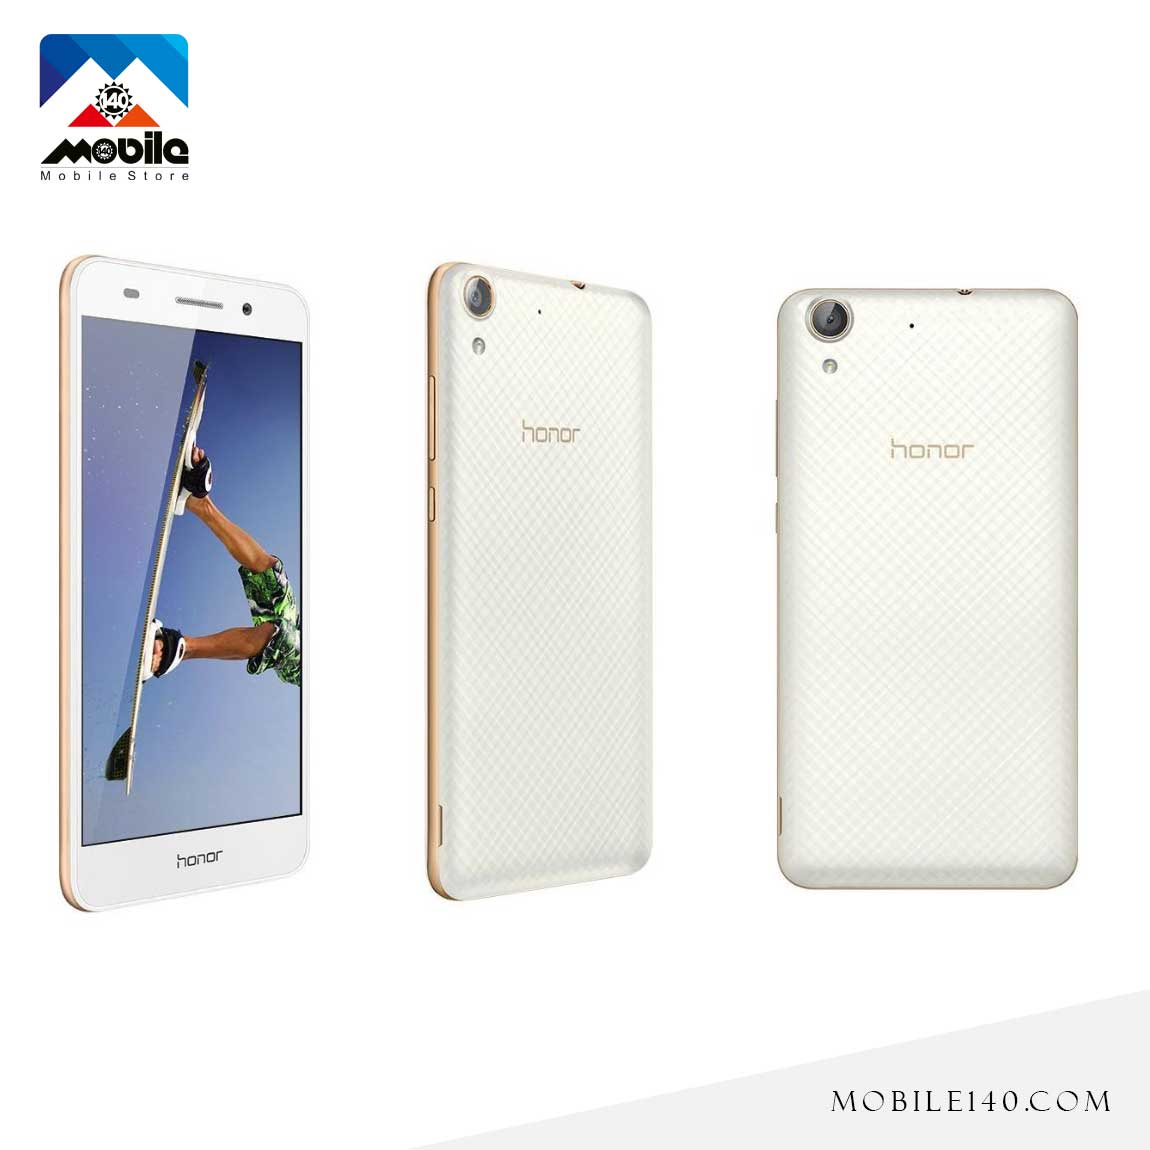  Honor 5A  1